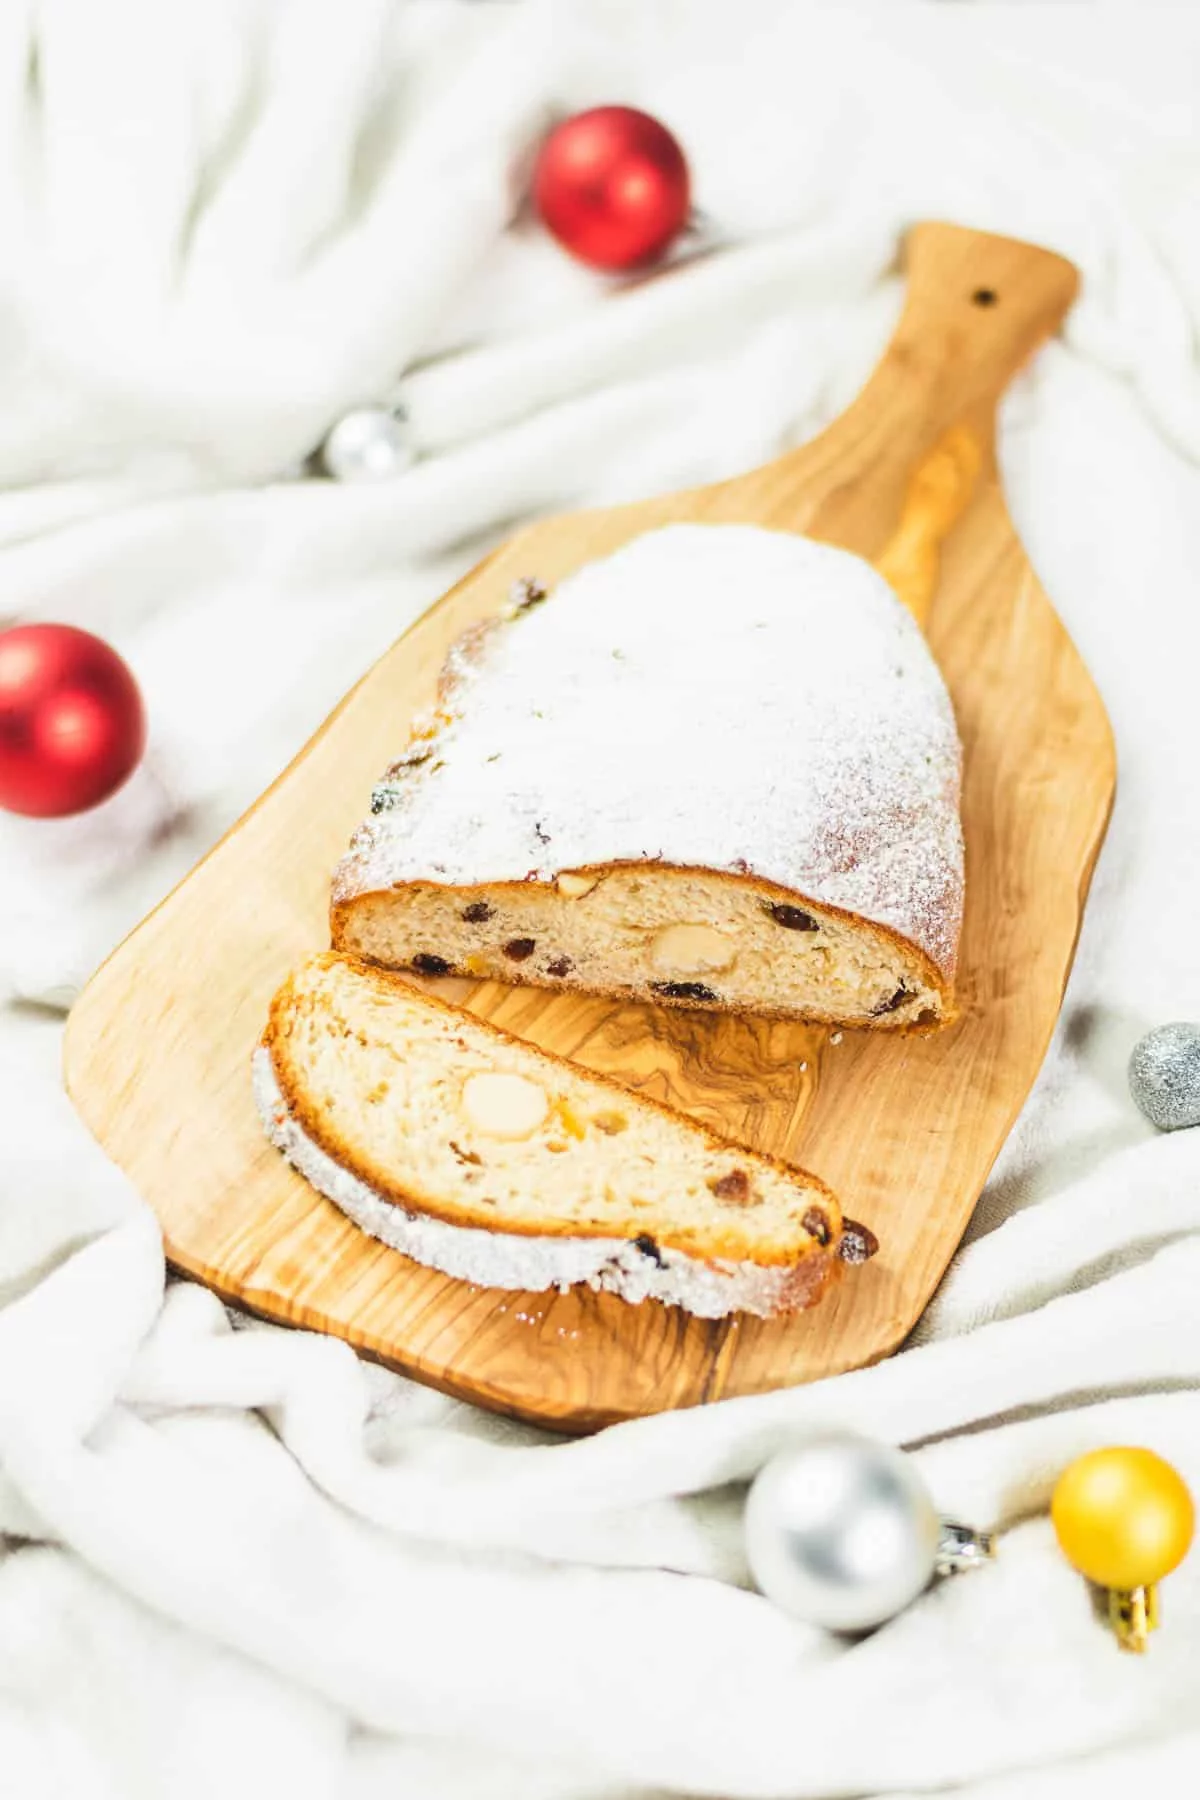 Authentic Stollen Recipe to Make for Christmas